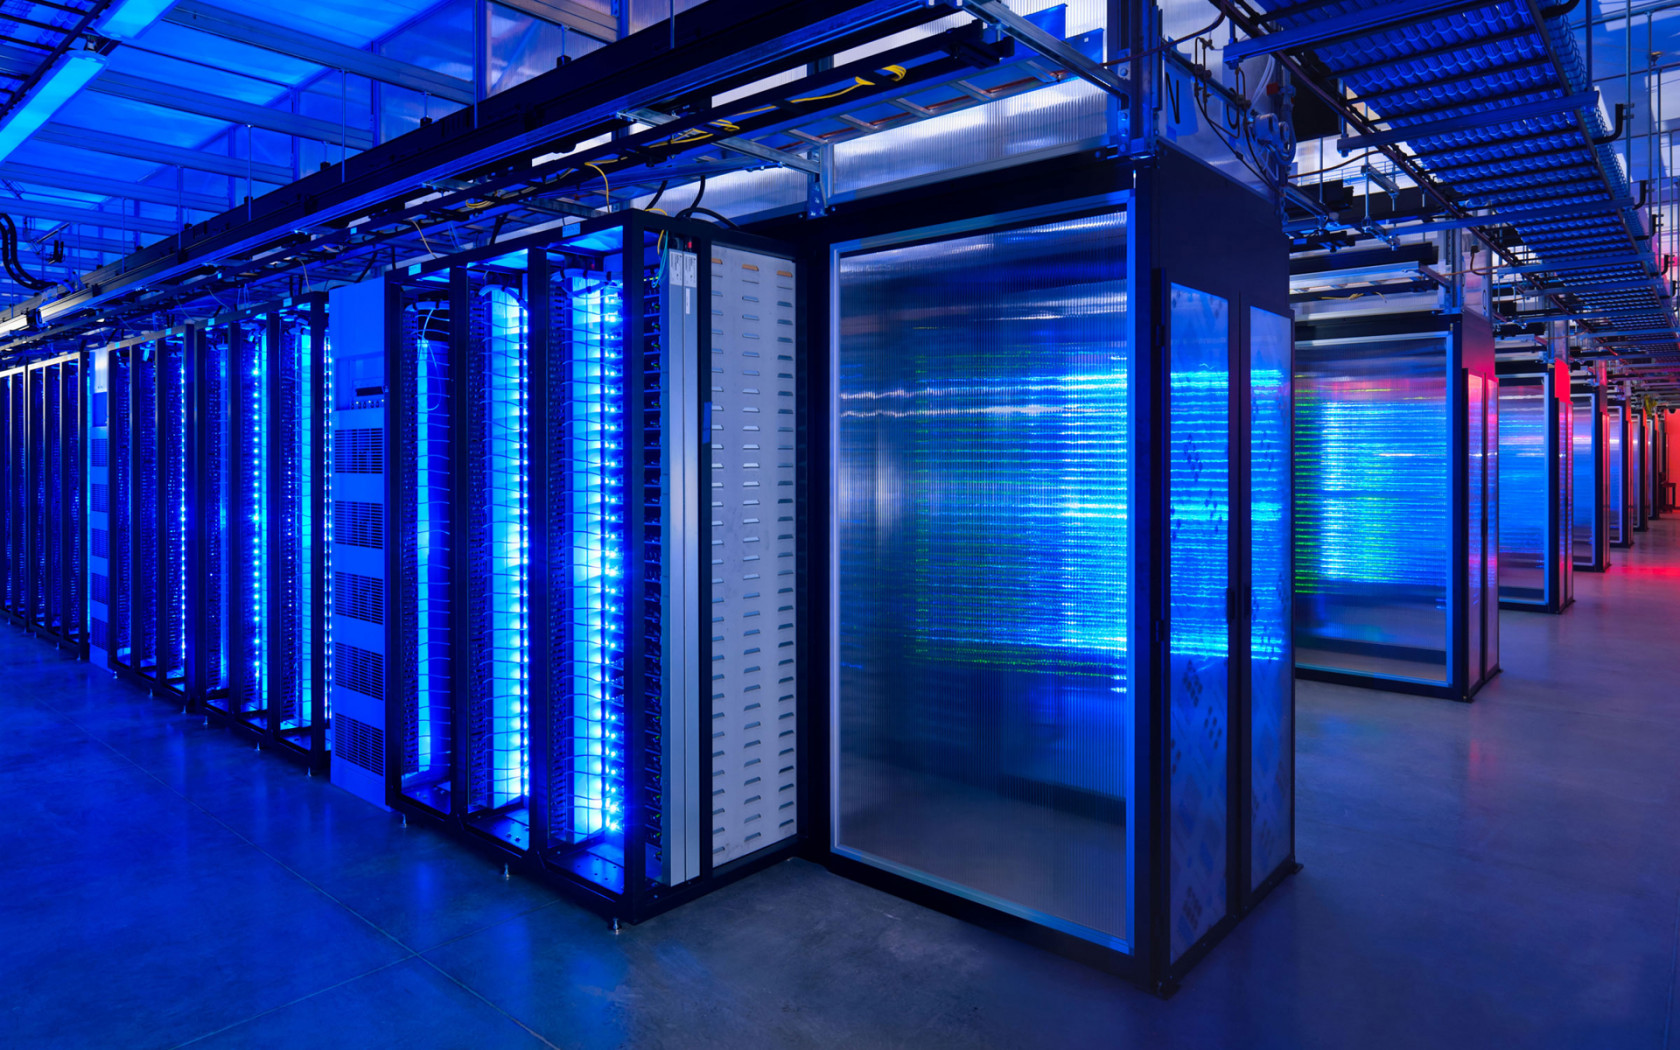 Opinion: Edge servers will redefine the cloud